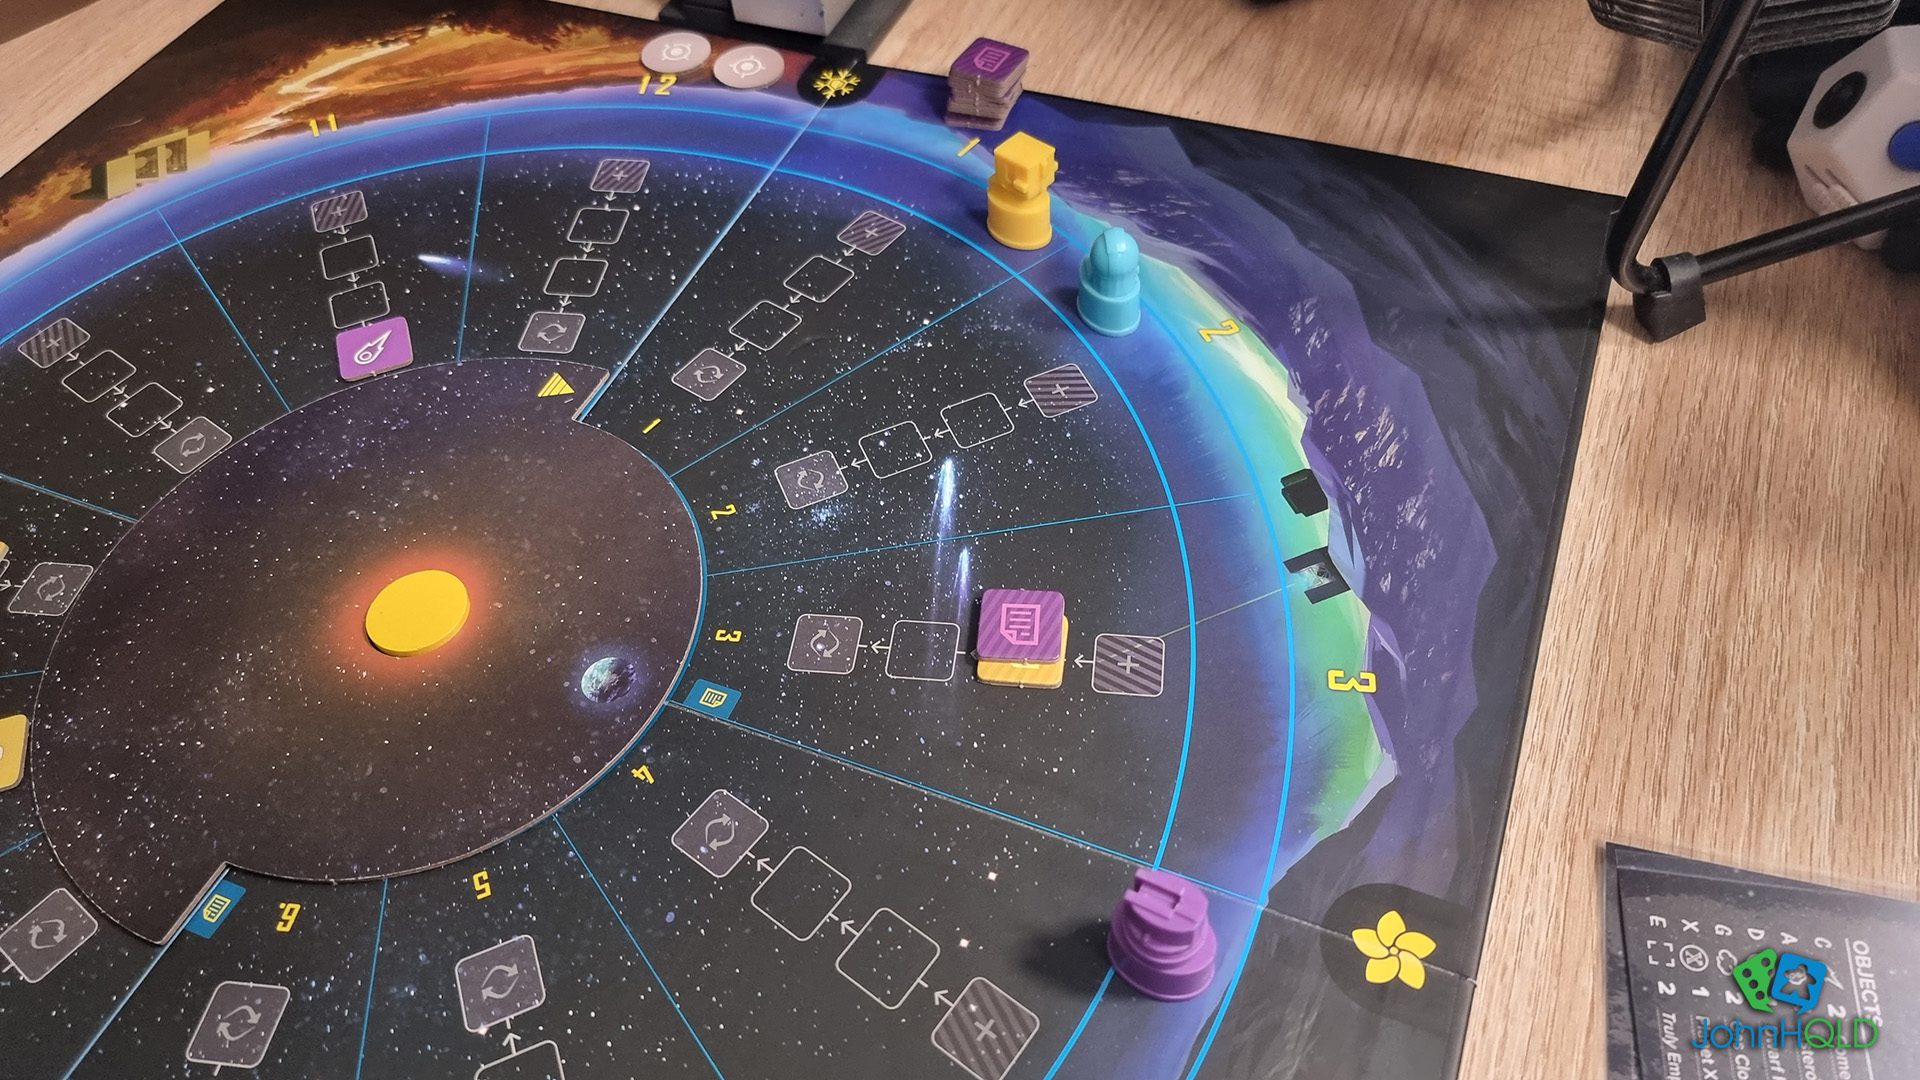 20220725 - Search for Planet X - Most of the game isnt on the board